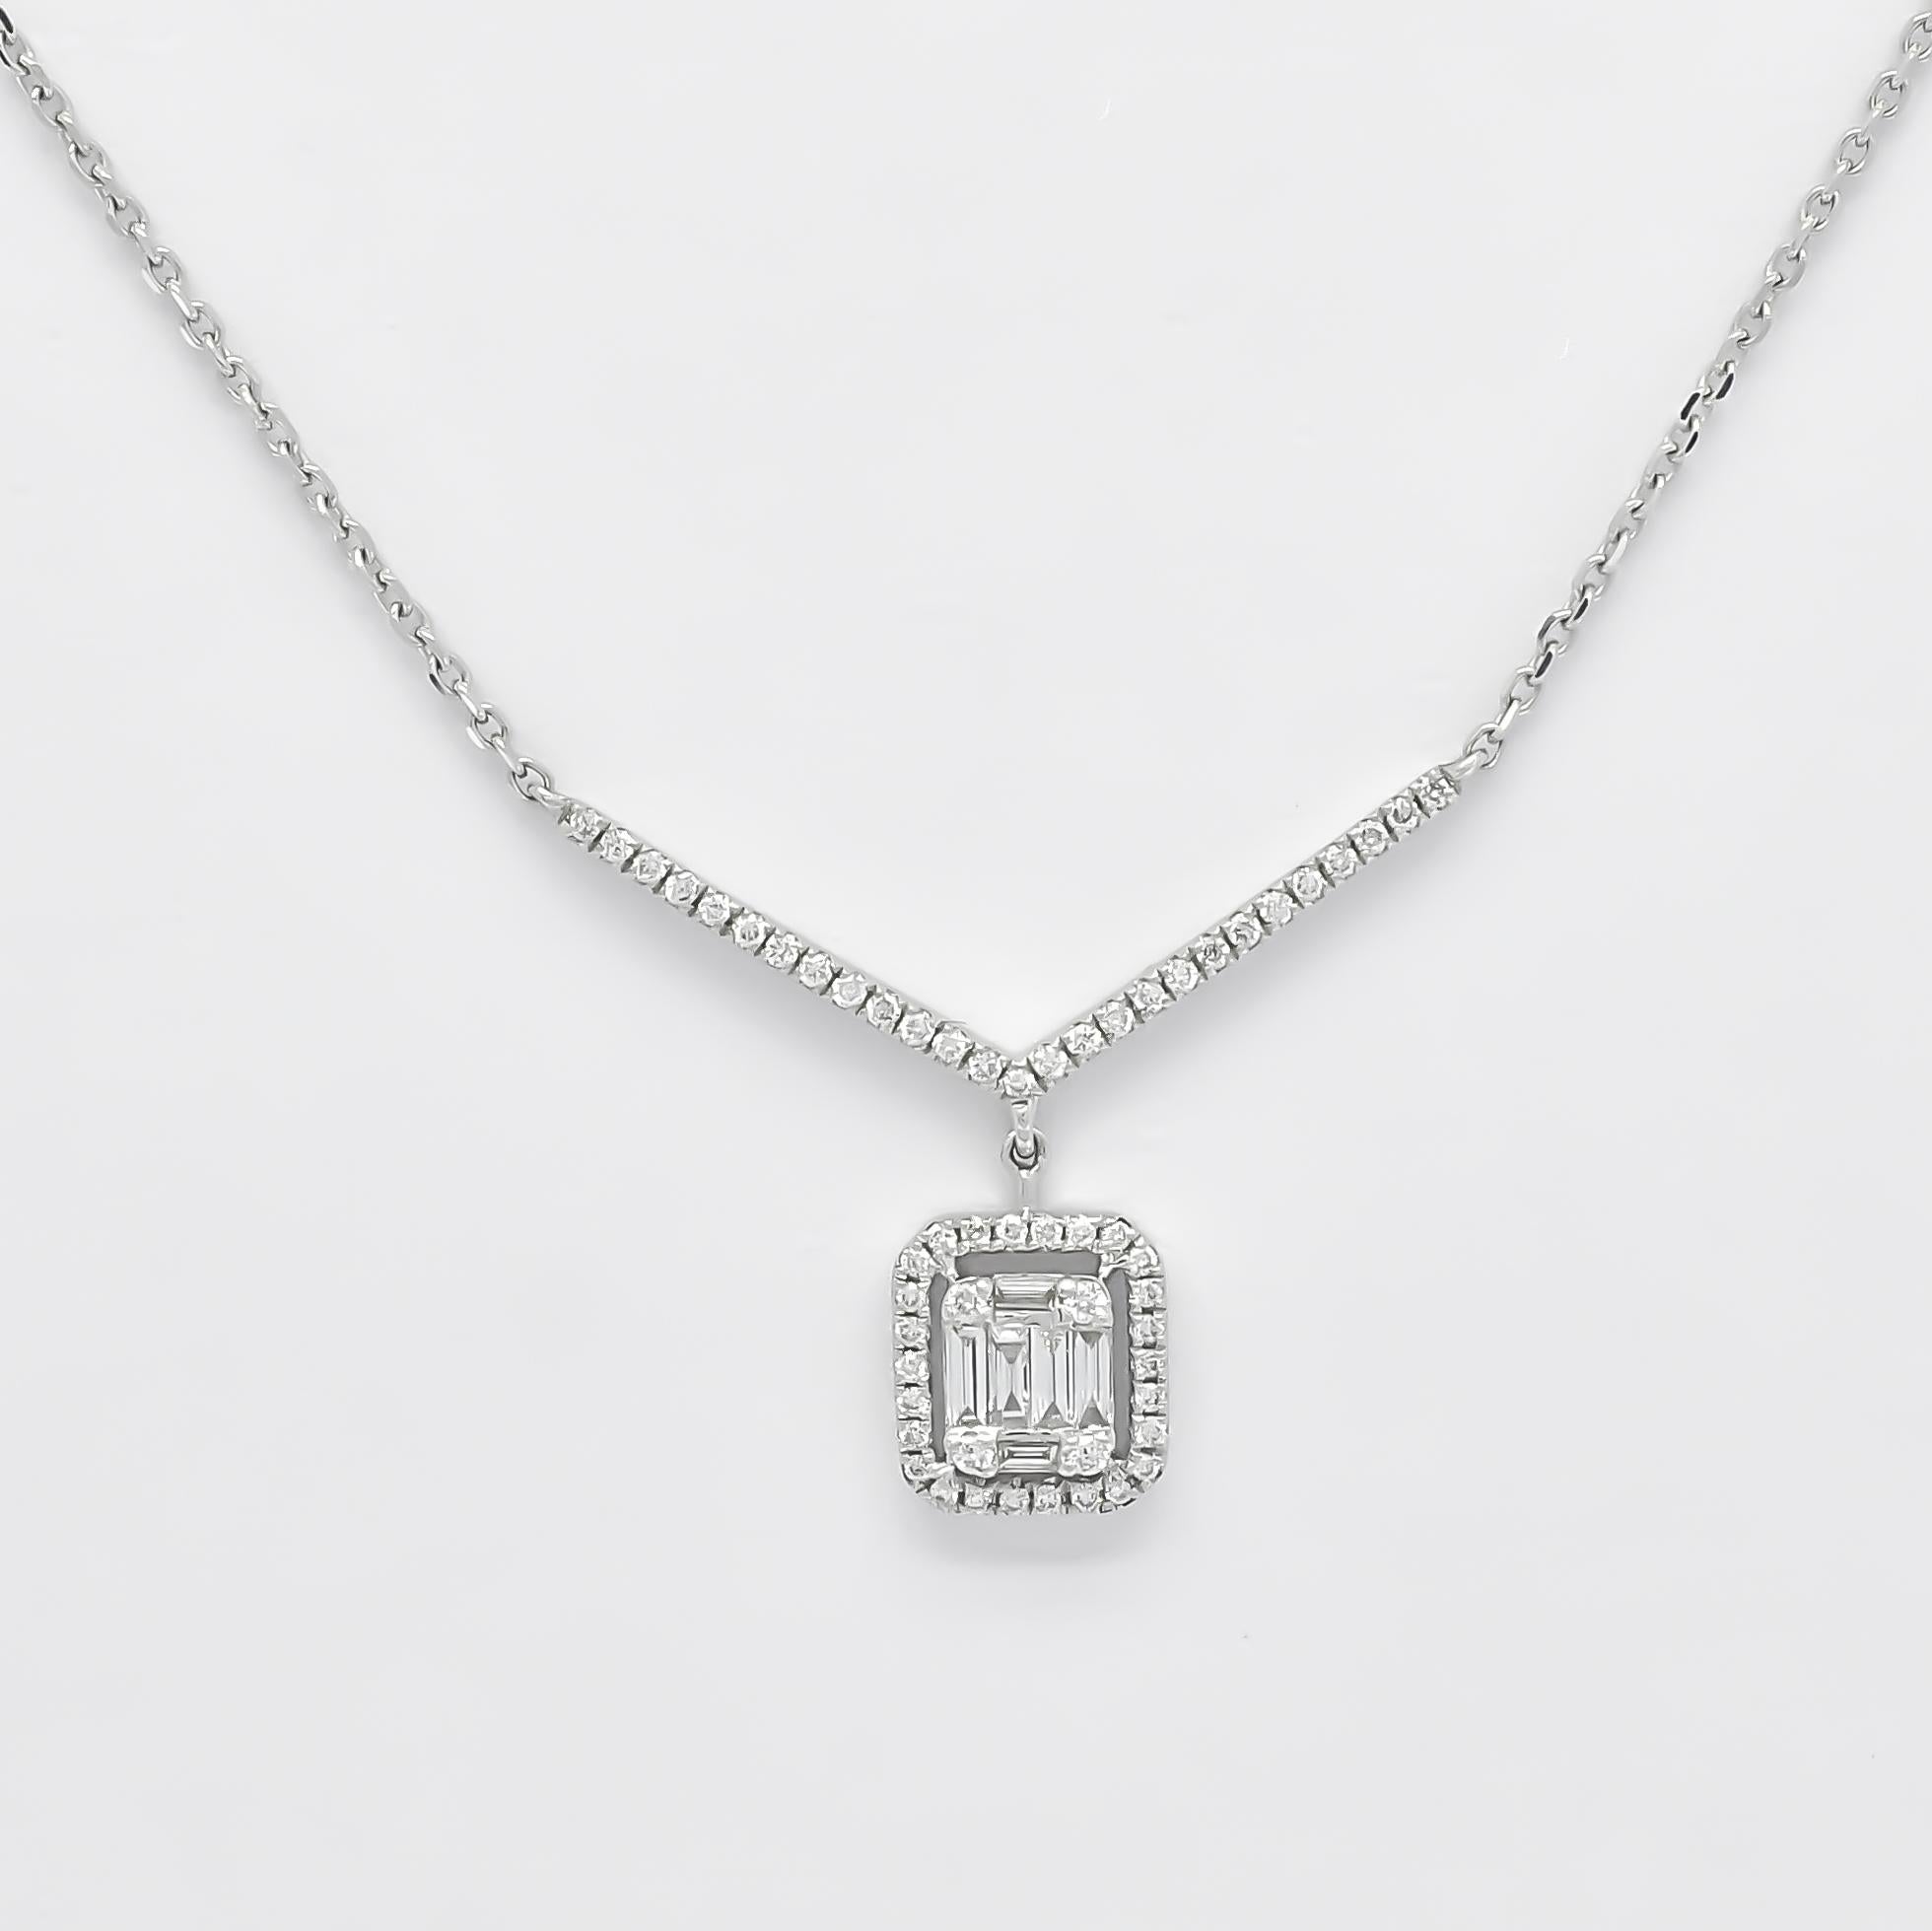 Women's or Men's Natural Diamond Necklace 0.31 cts 18 Karat White Gold Single Row Necklace For Sale